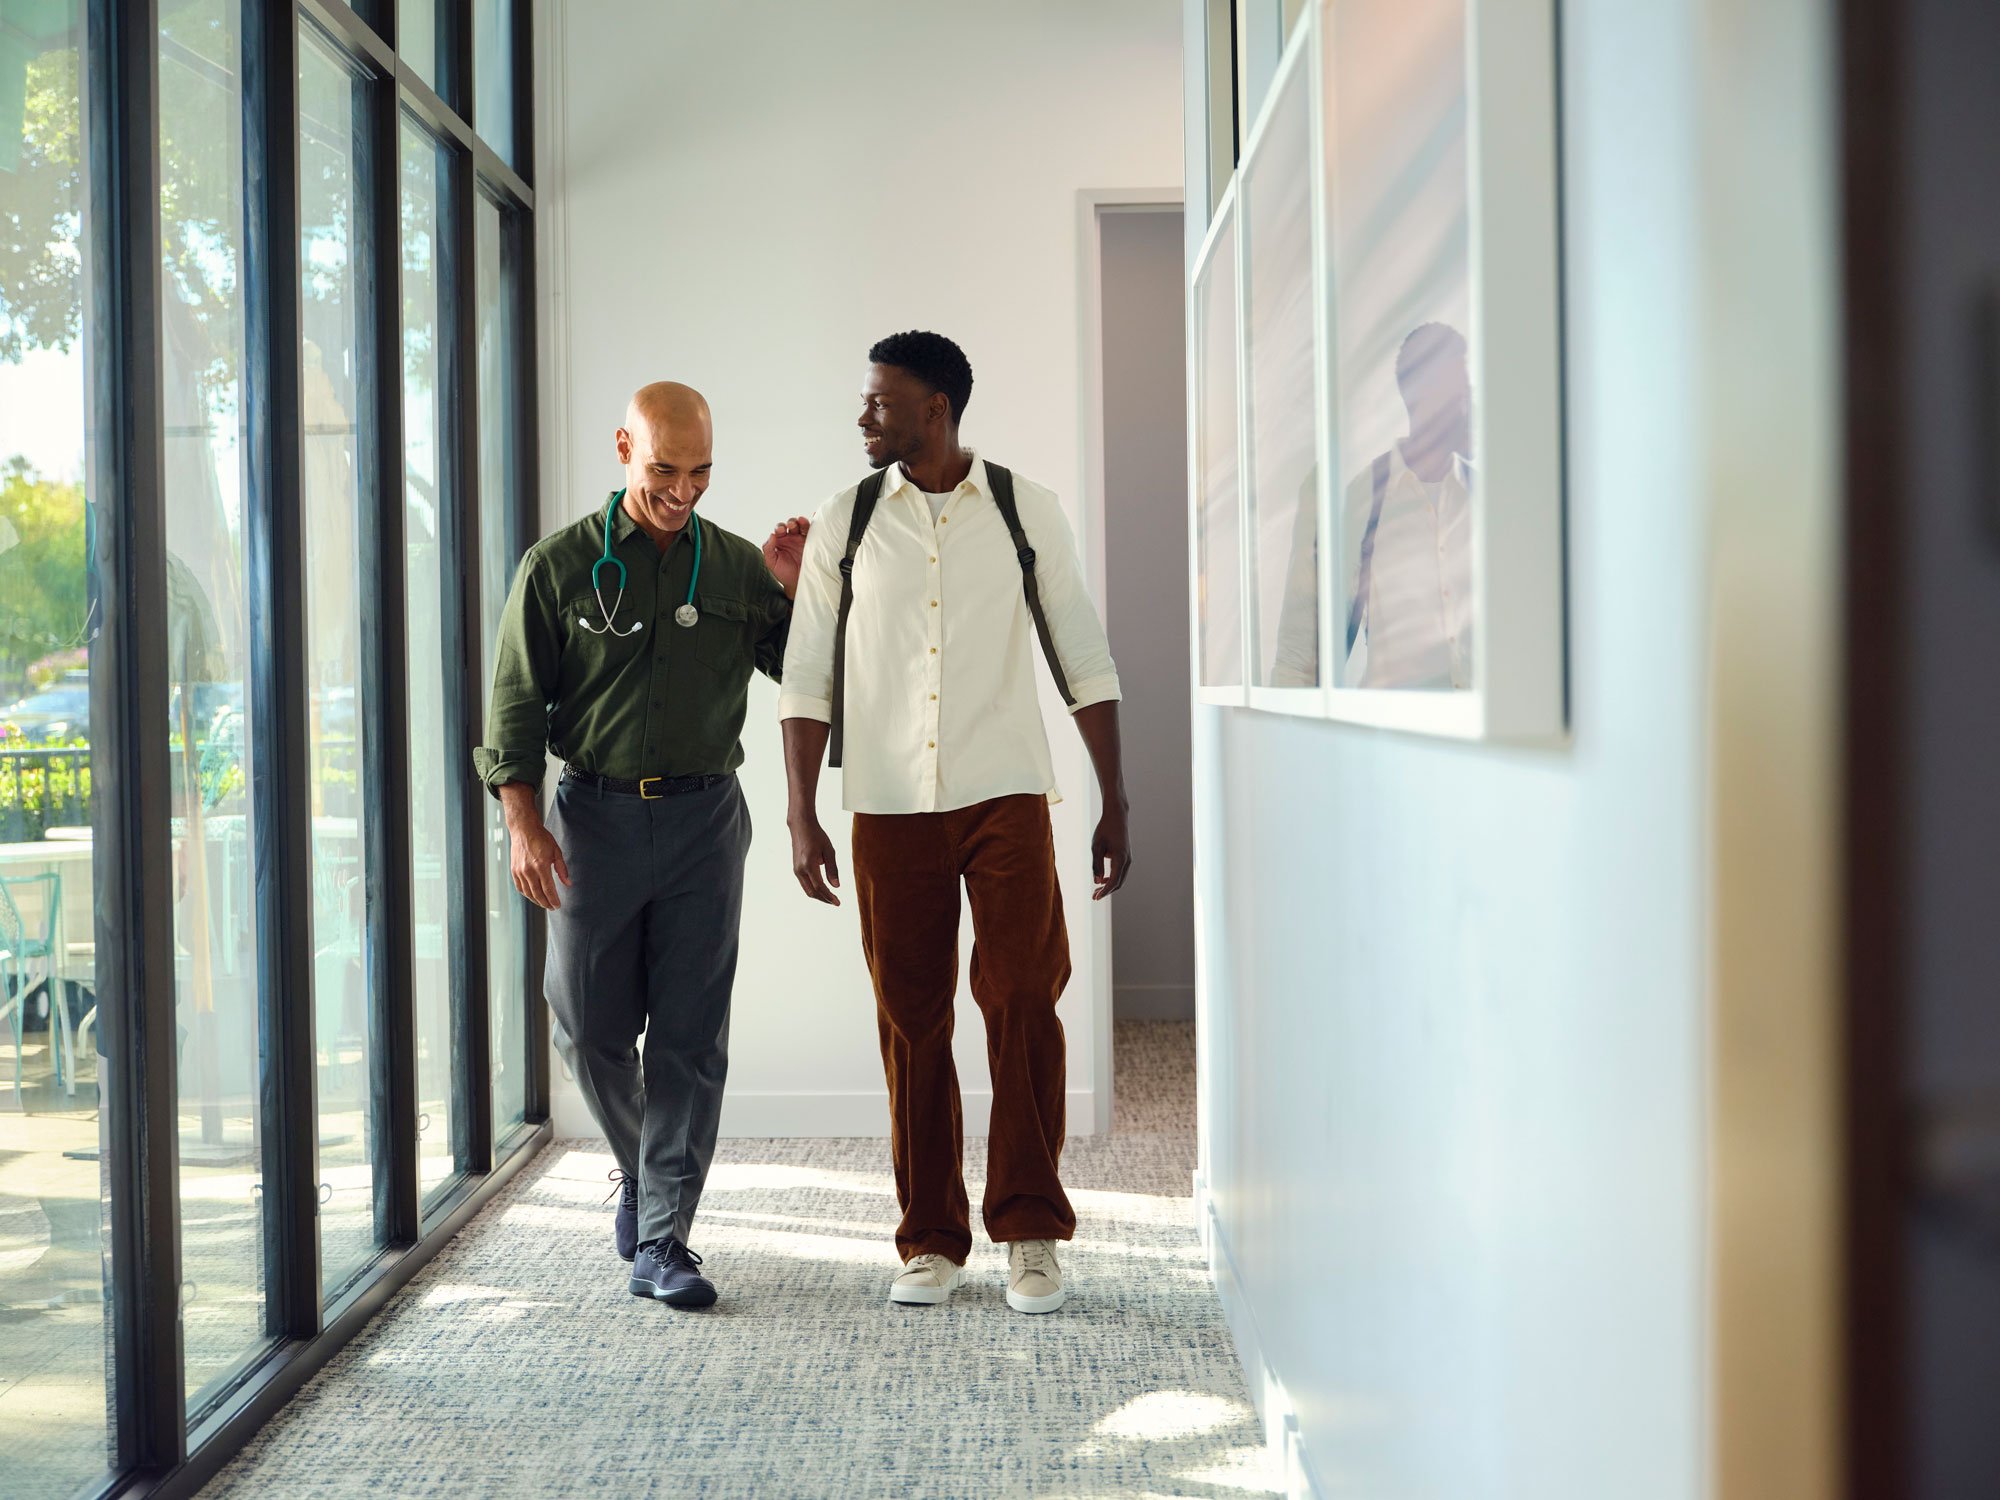 Doctor and male patient walking together down a One Medical office hallway